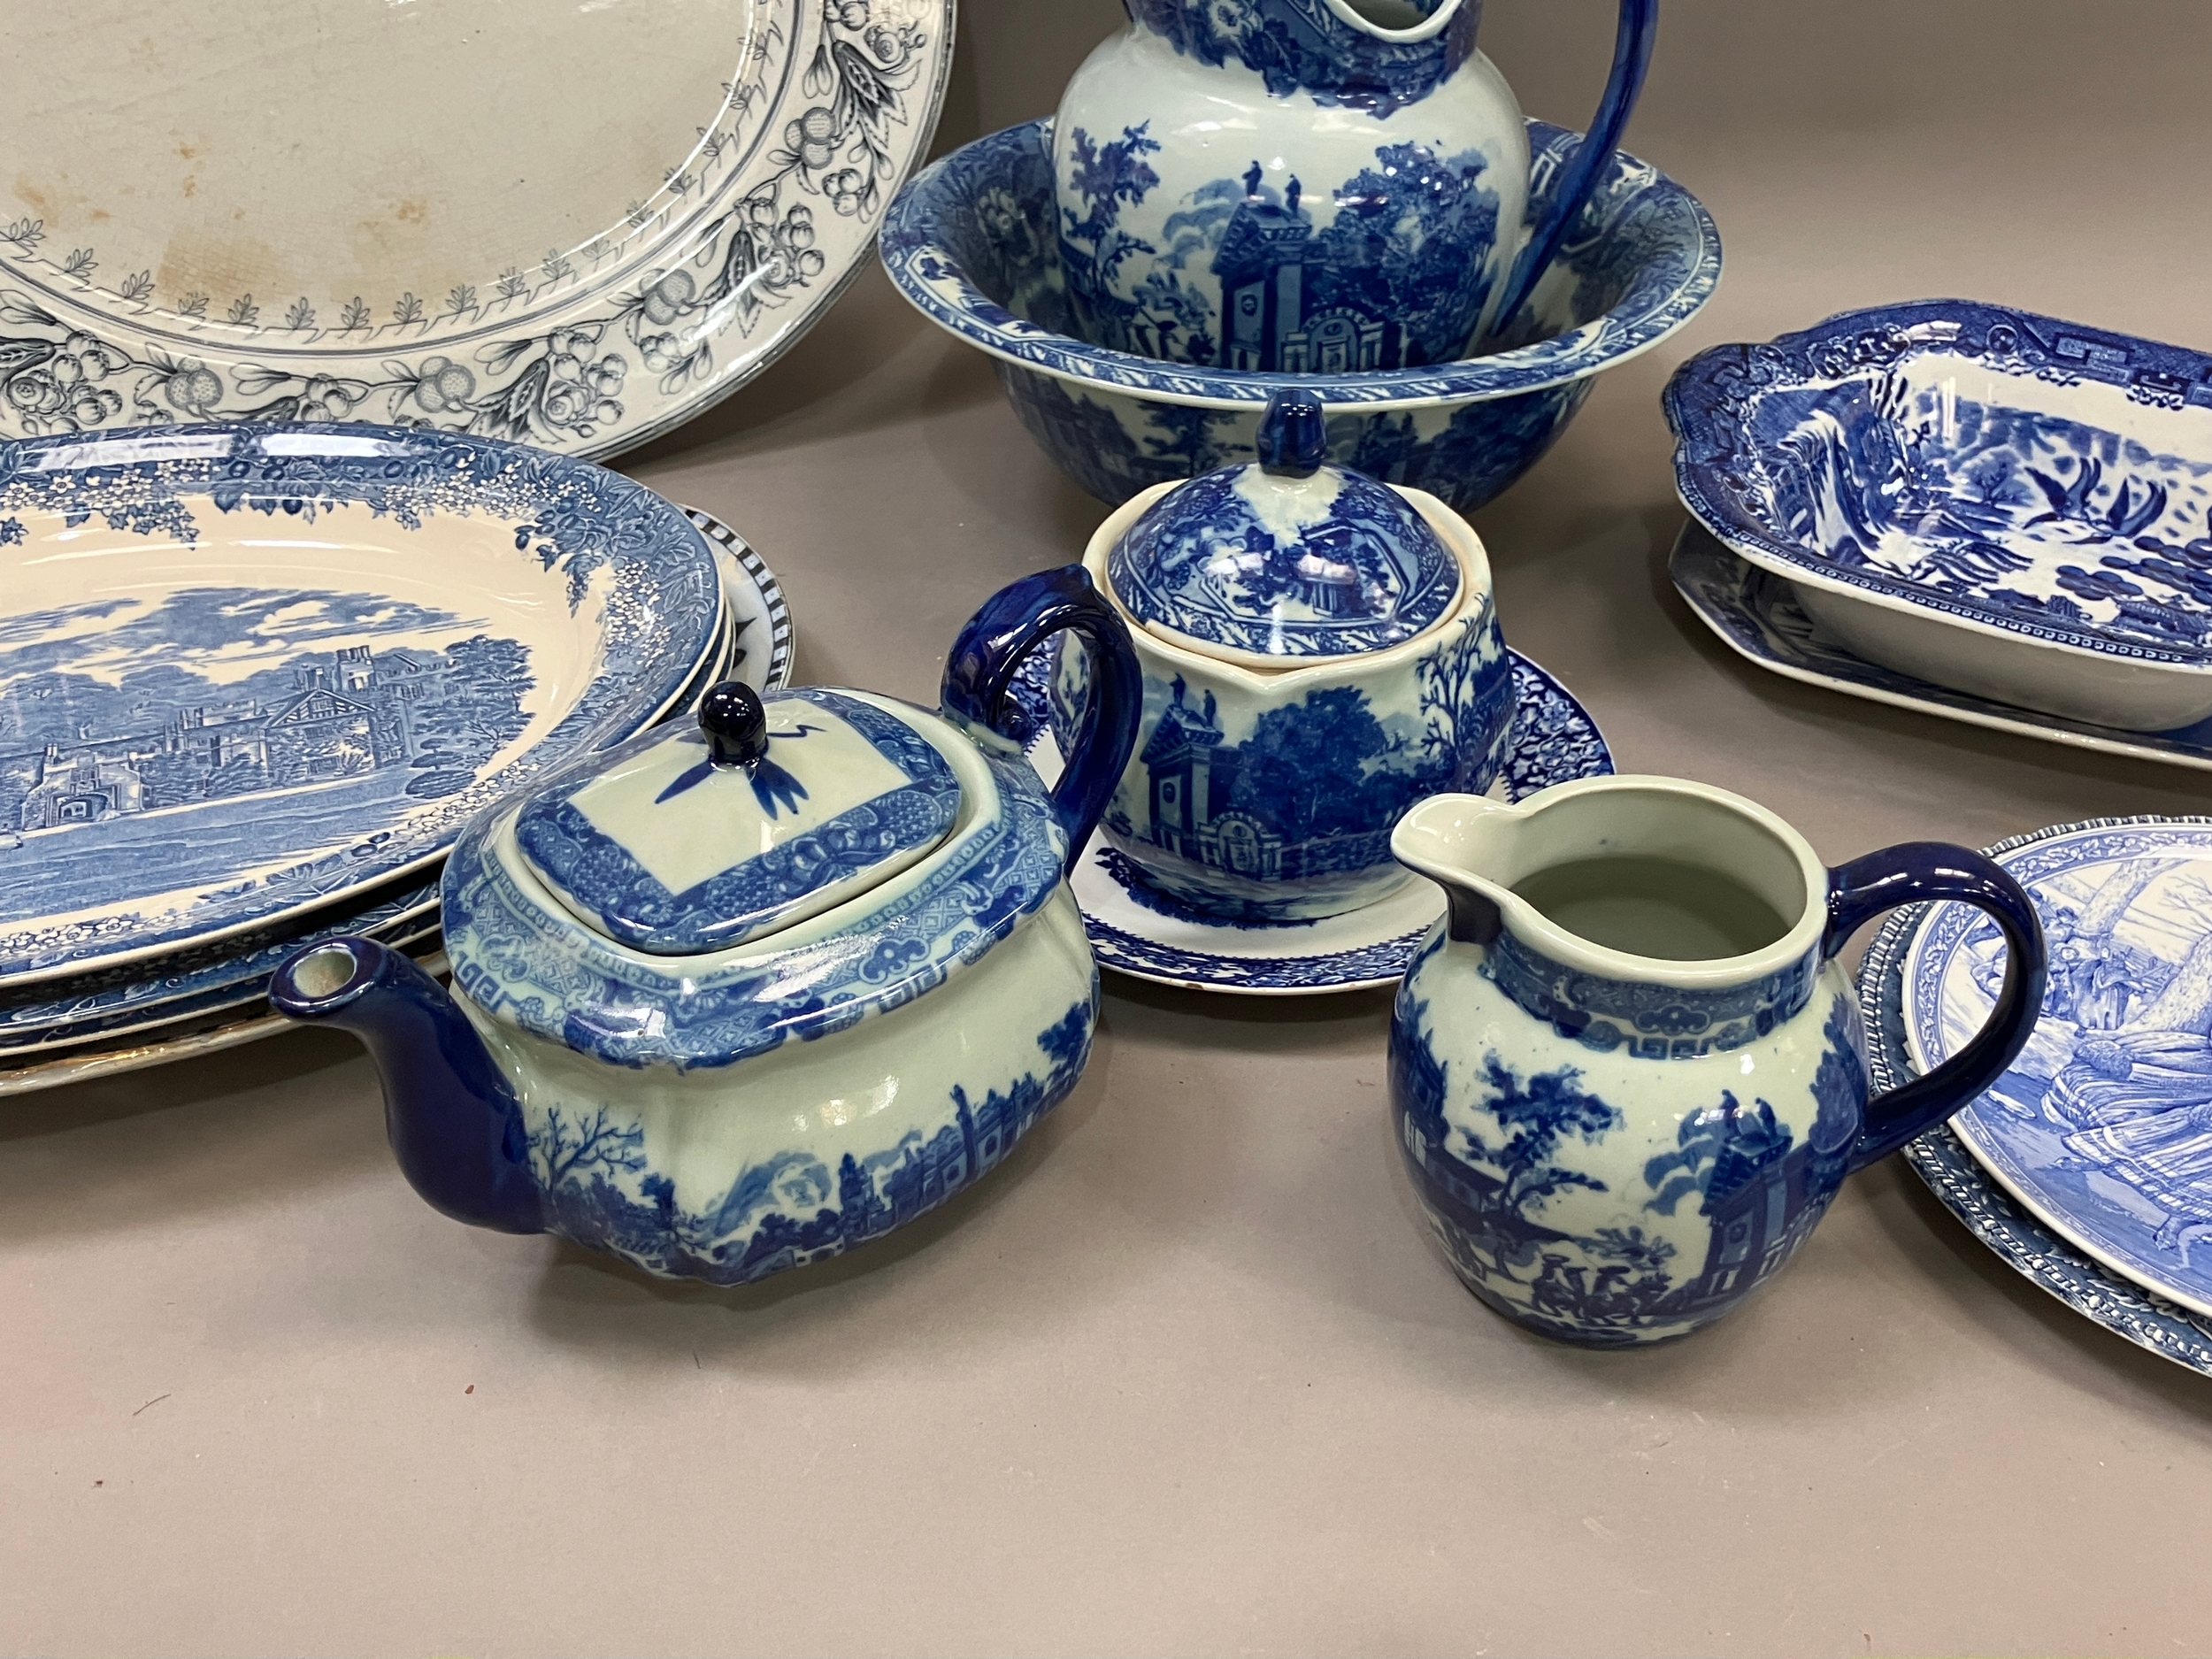 A collection of blue and white ware including jugs, large bowls etc